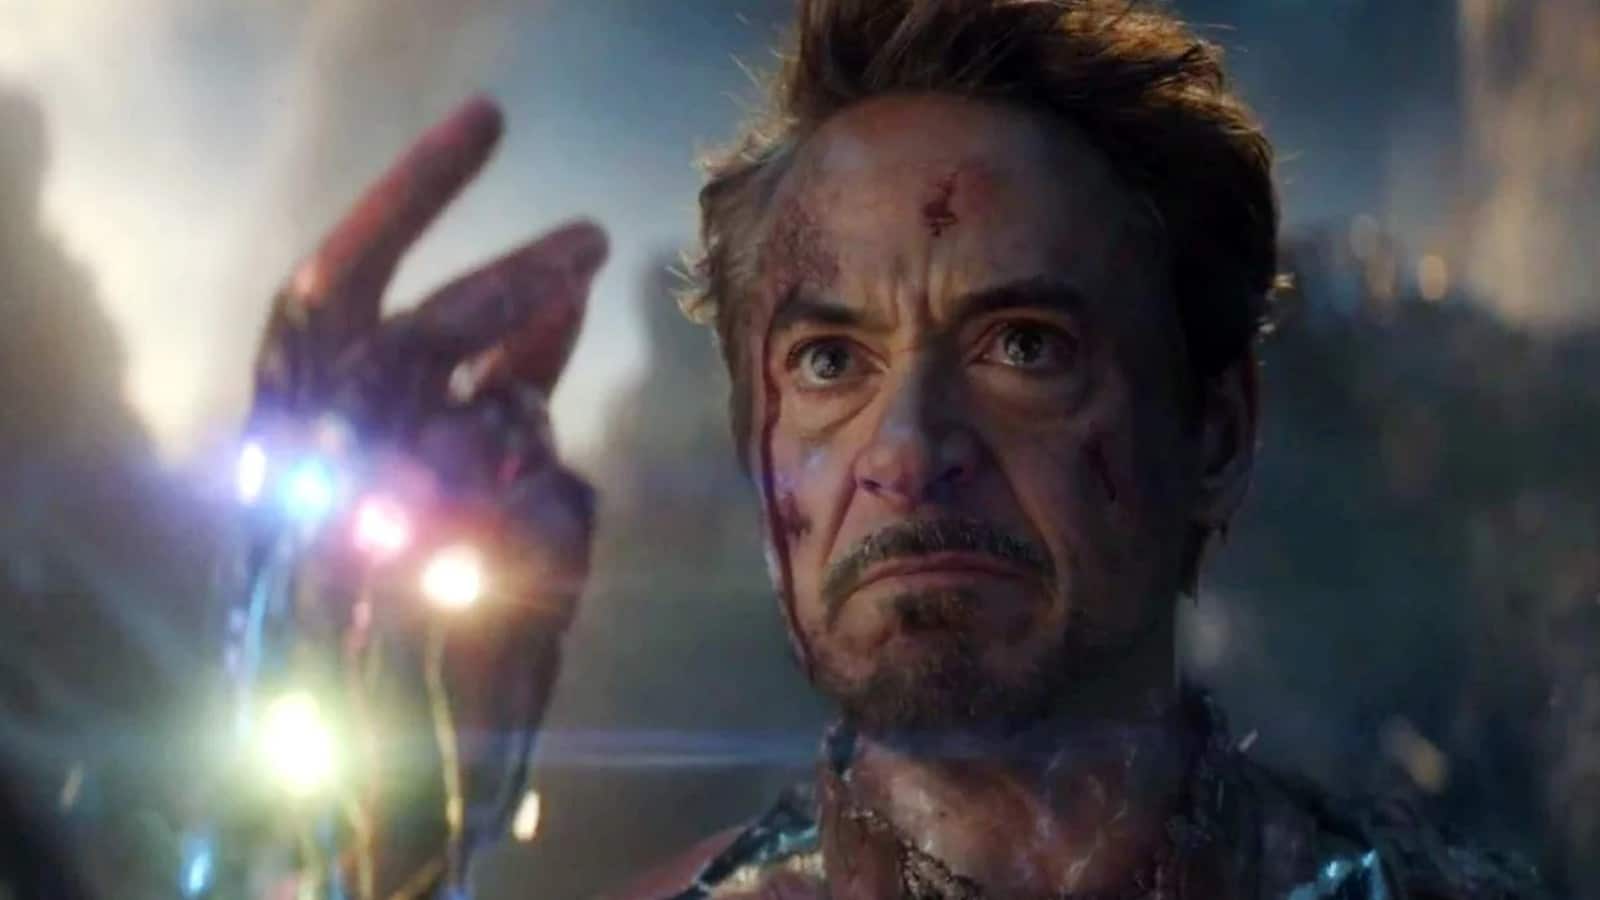 Marvel Comics may have Tony Stark return to the live-action MCU